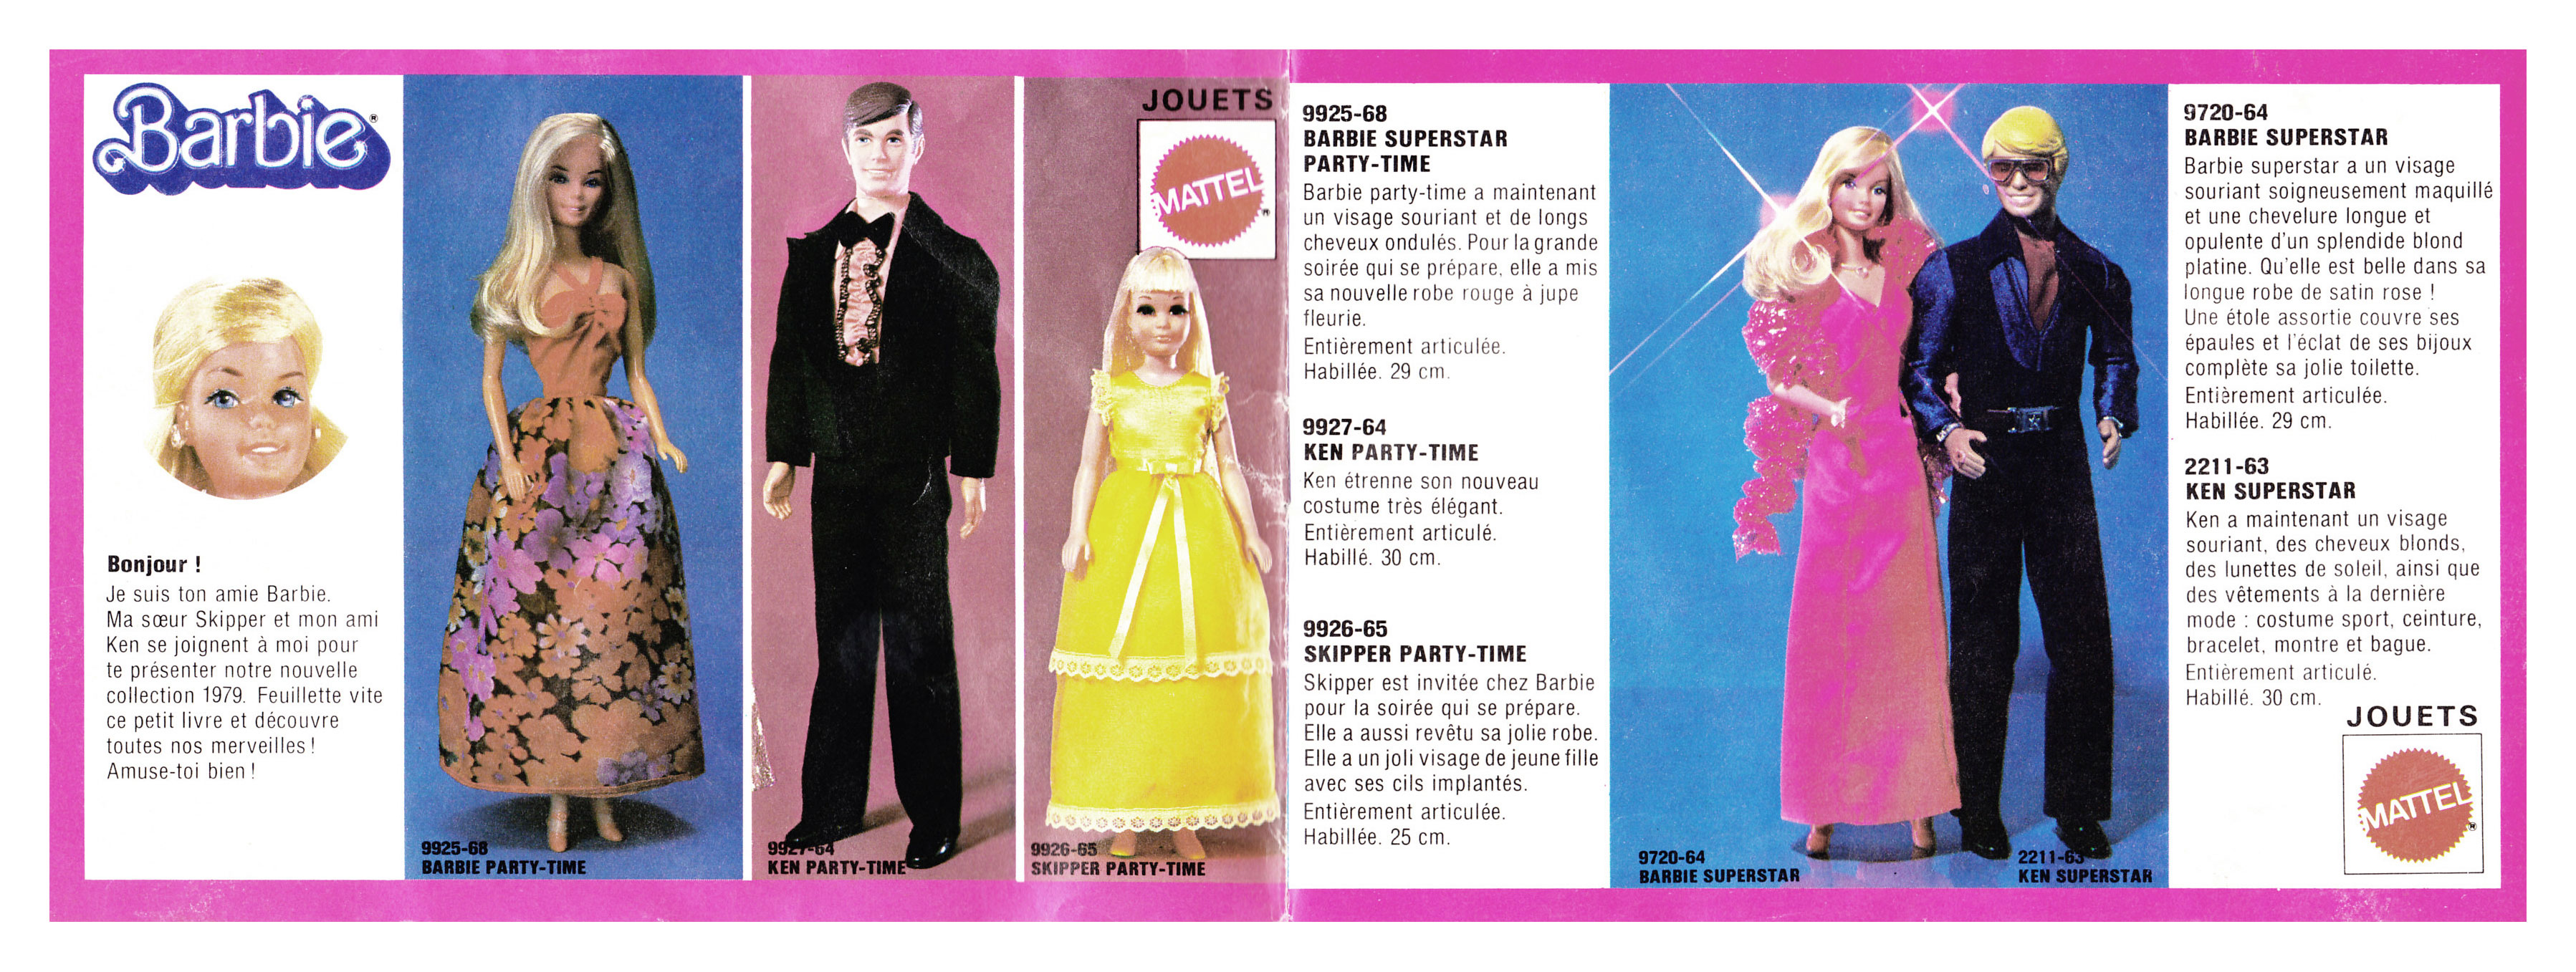 From 1979 French Barbie booklet